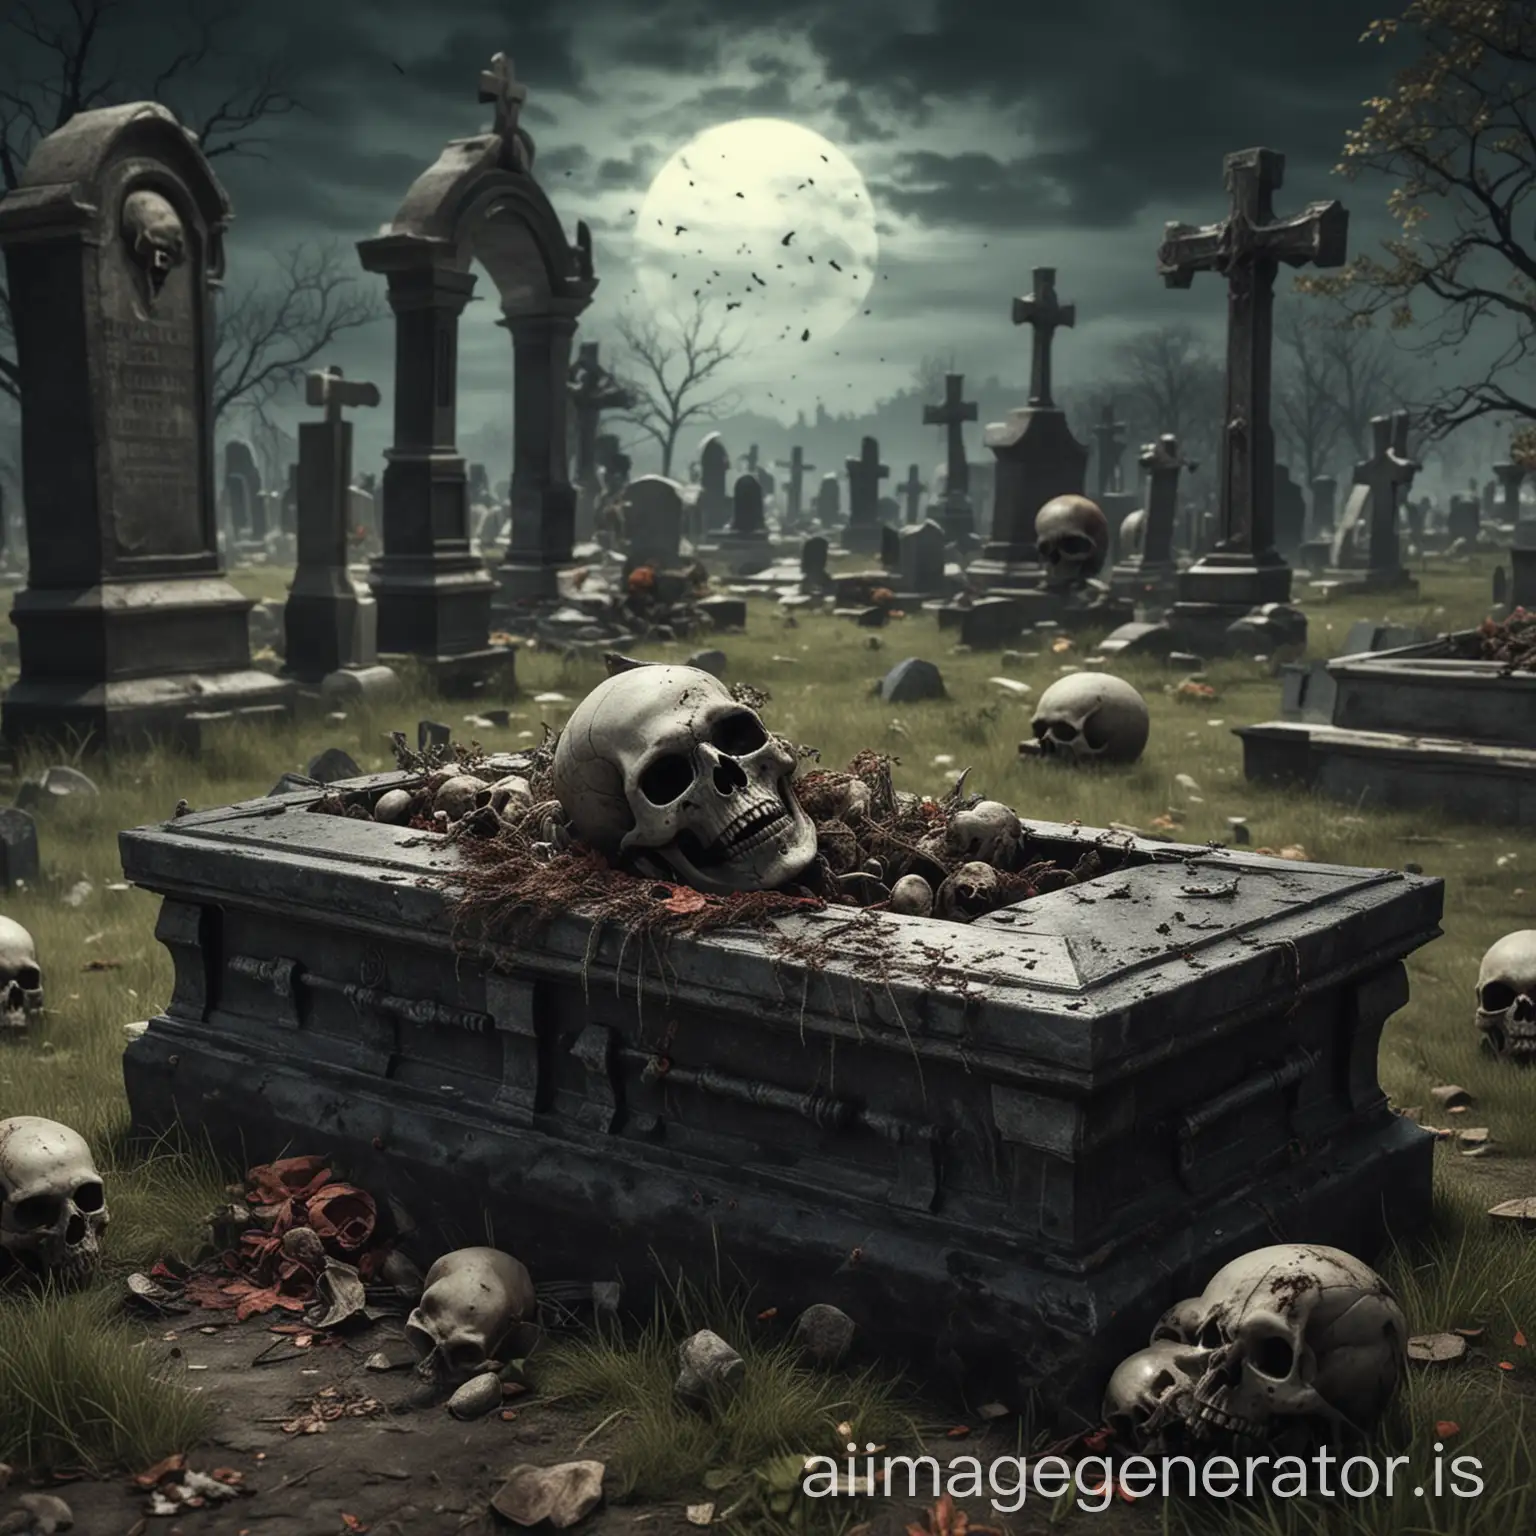 Generate a graveyard scene image, include coffins, skulls, and zombie elements